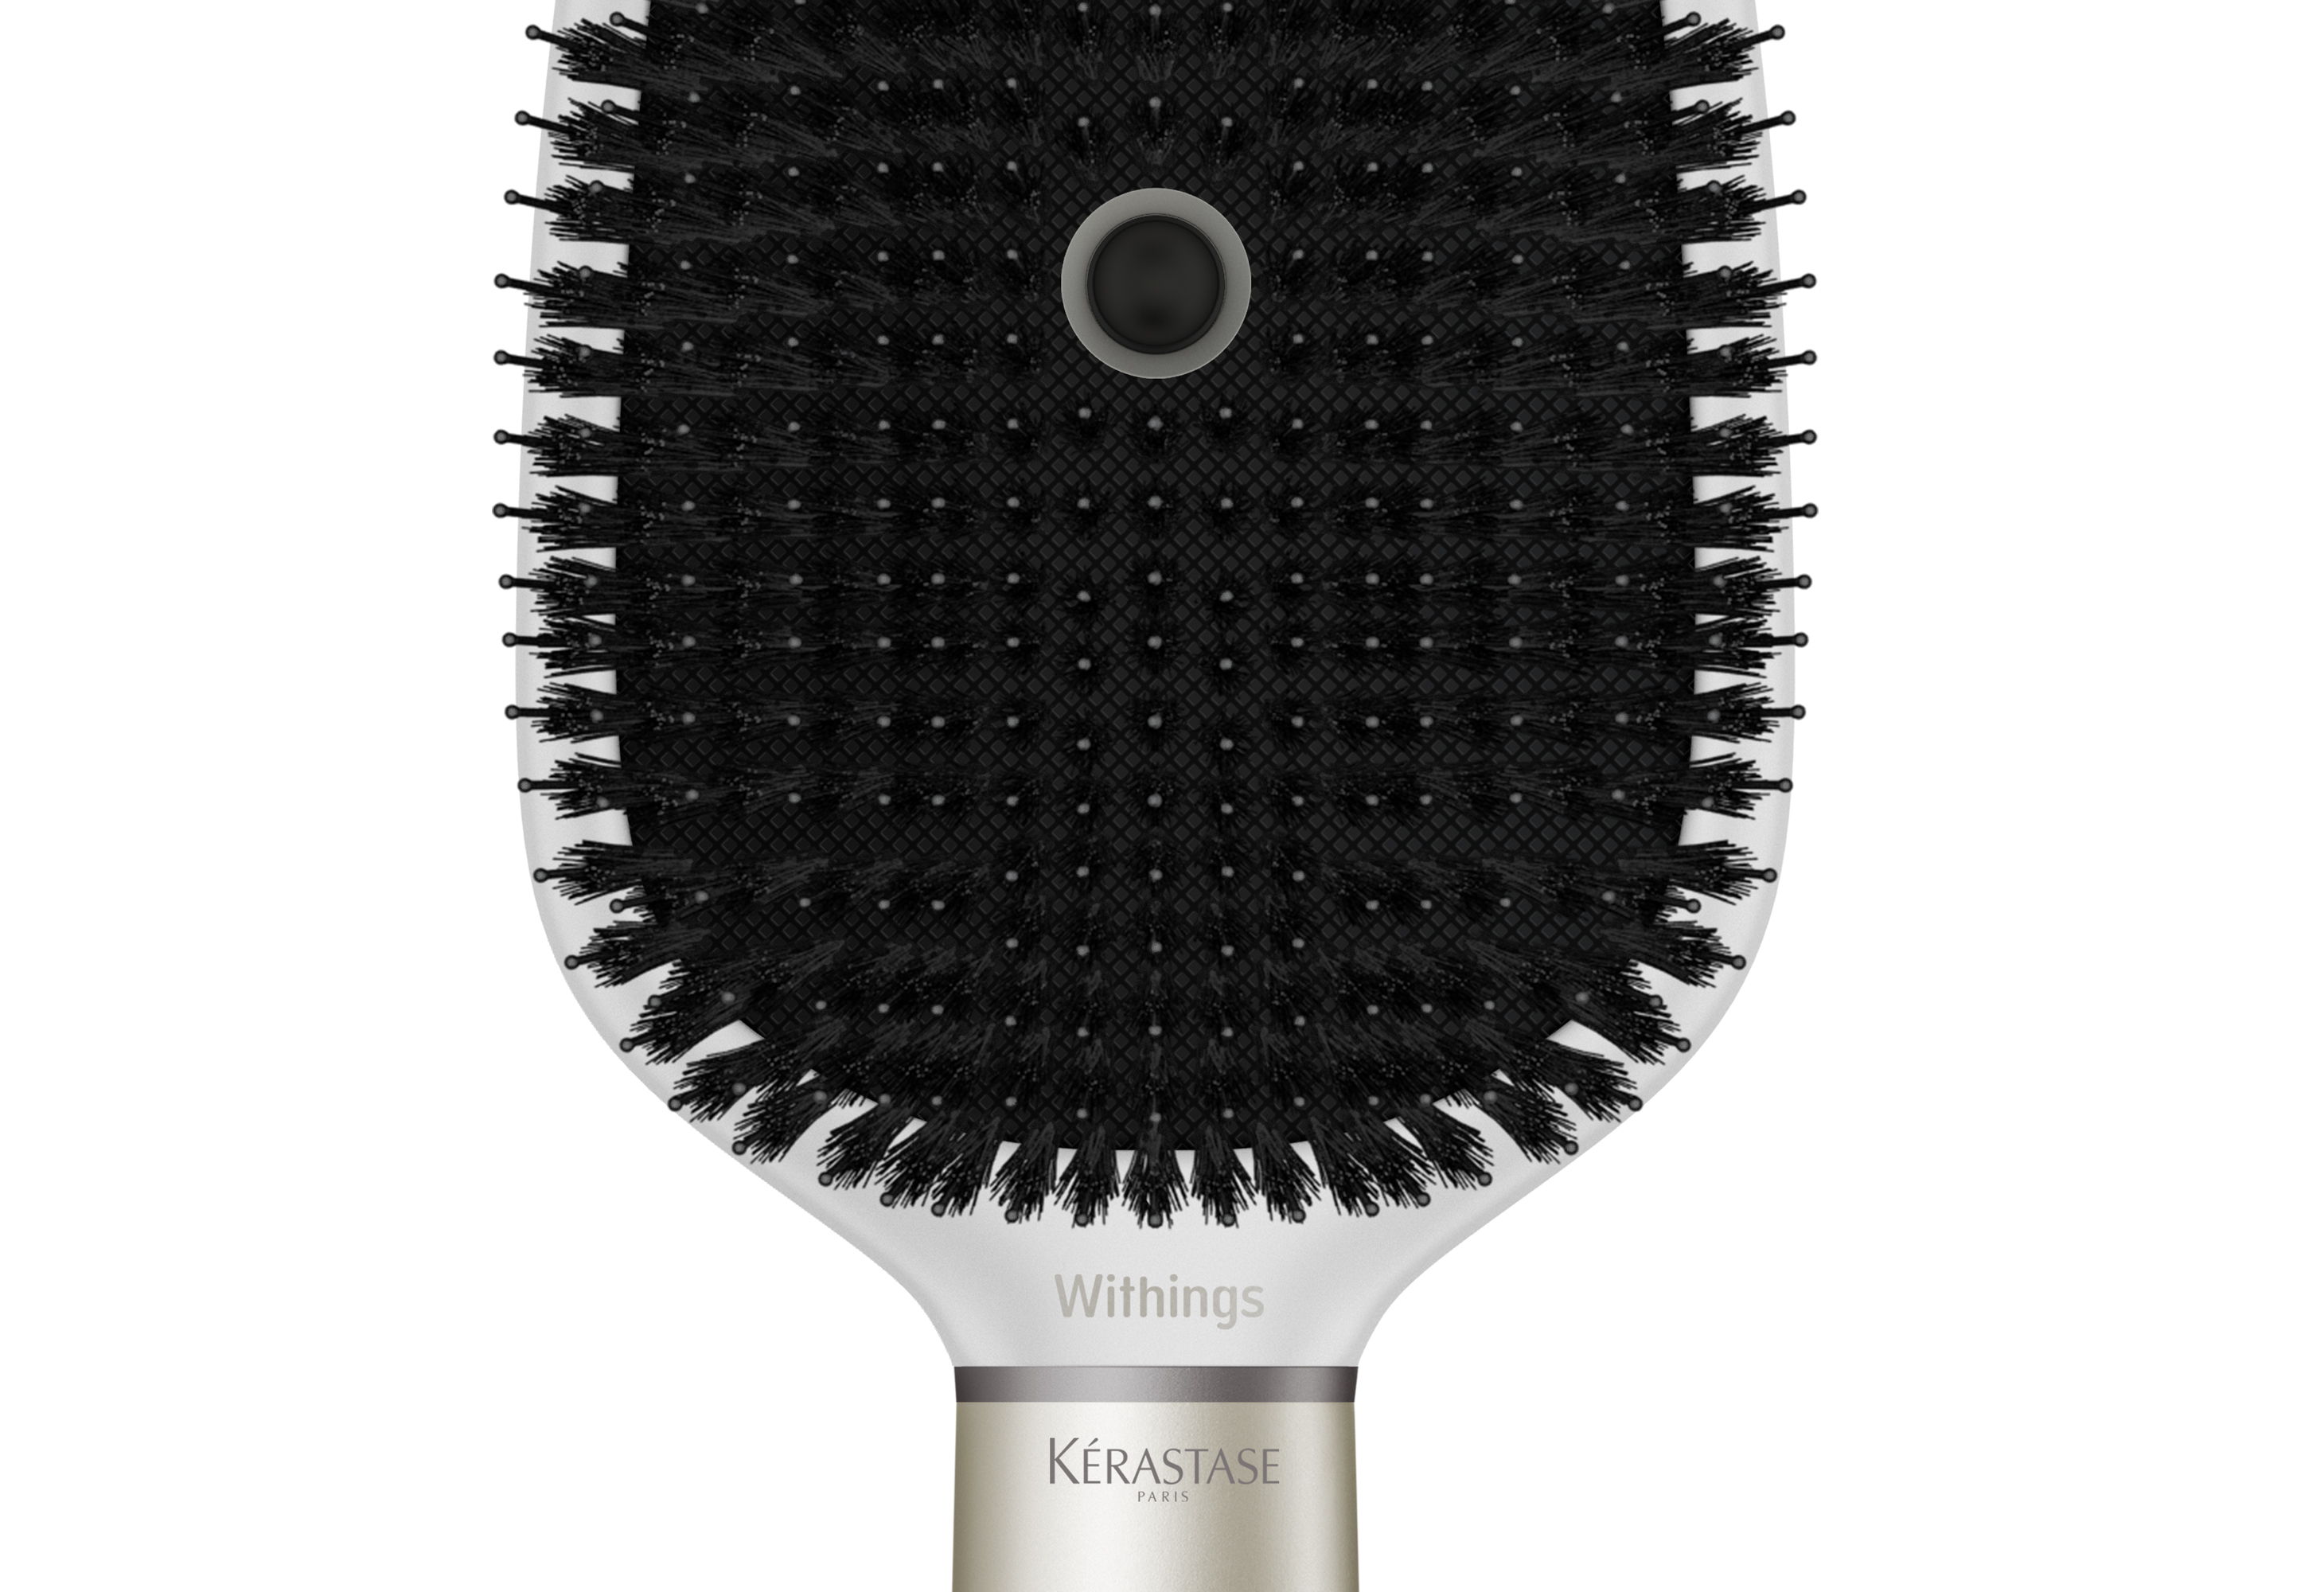 Here's a smart hairbrush with a built-in microphone from Withings and  L'Oreal | TechCrunch